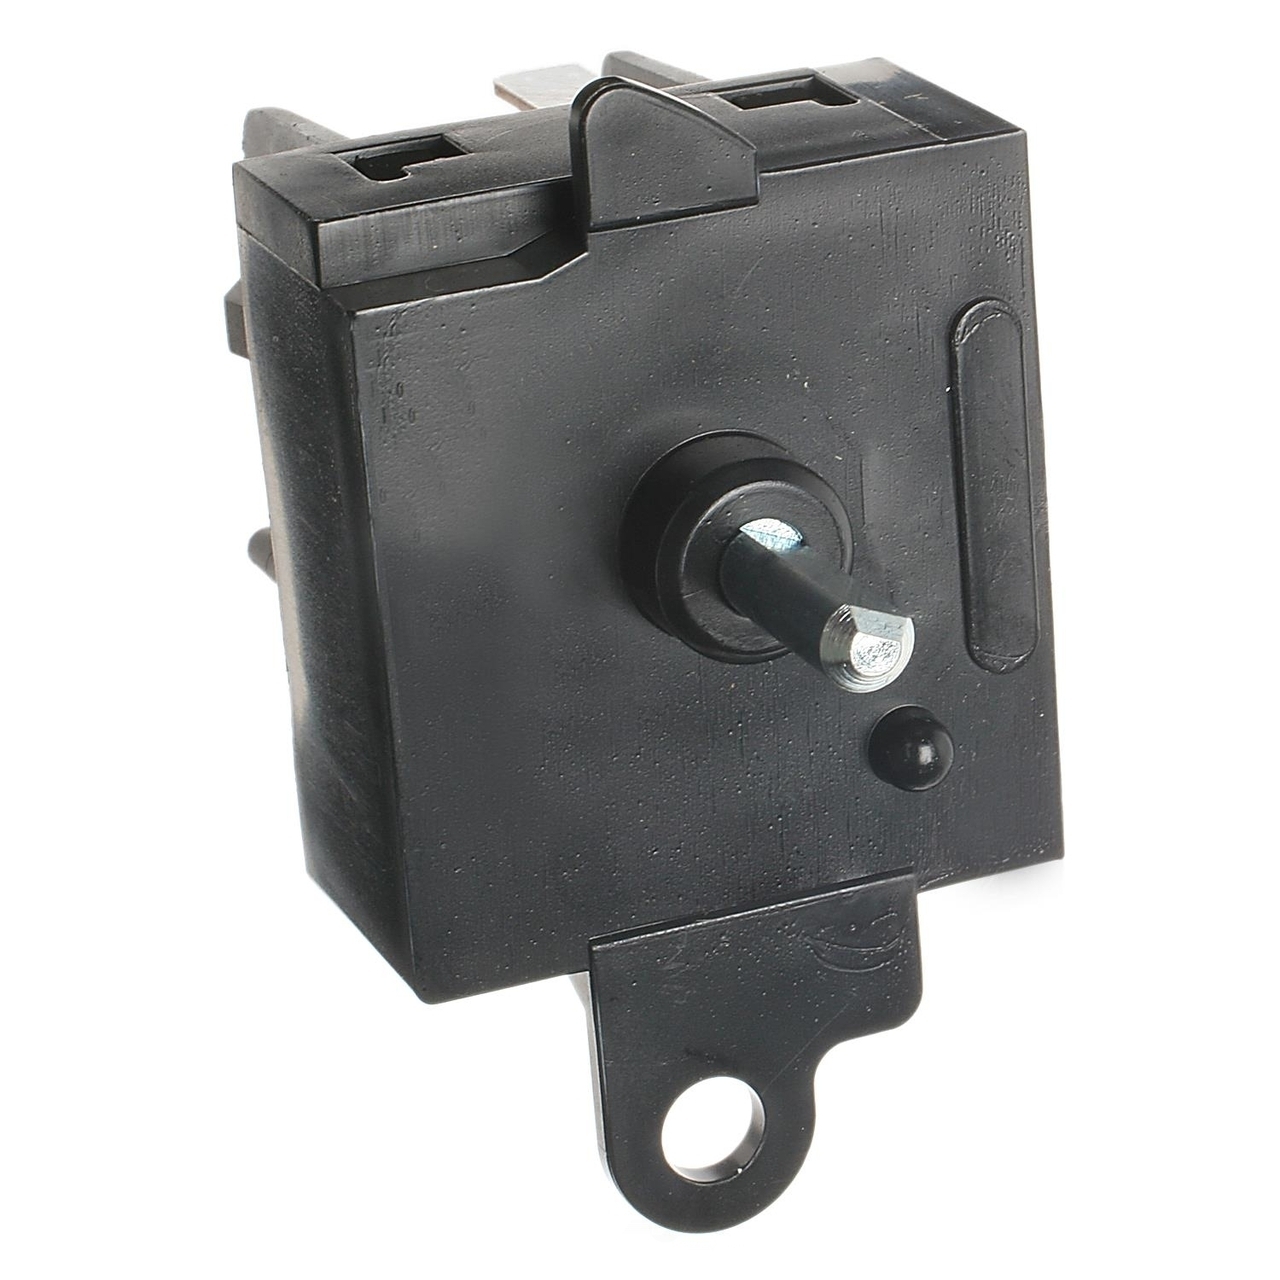 2012 Ford E-150 HVAC Blower Control Switch - Standard Motor Products HS-319